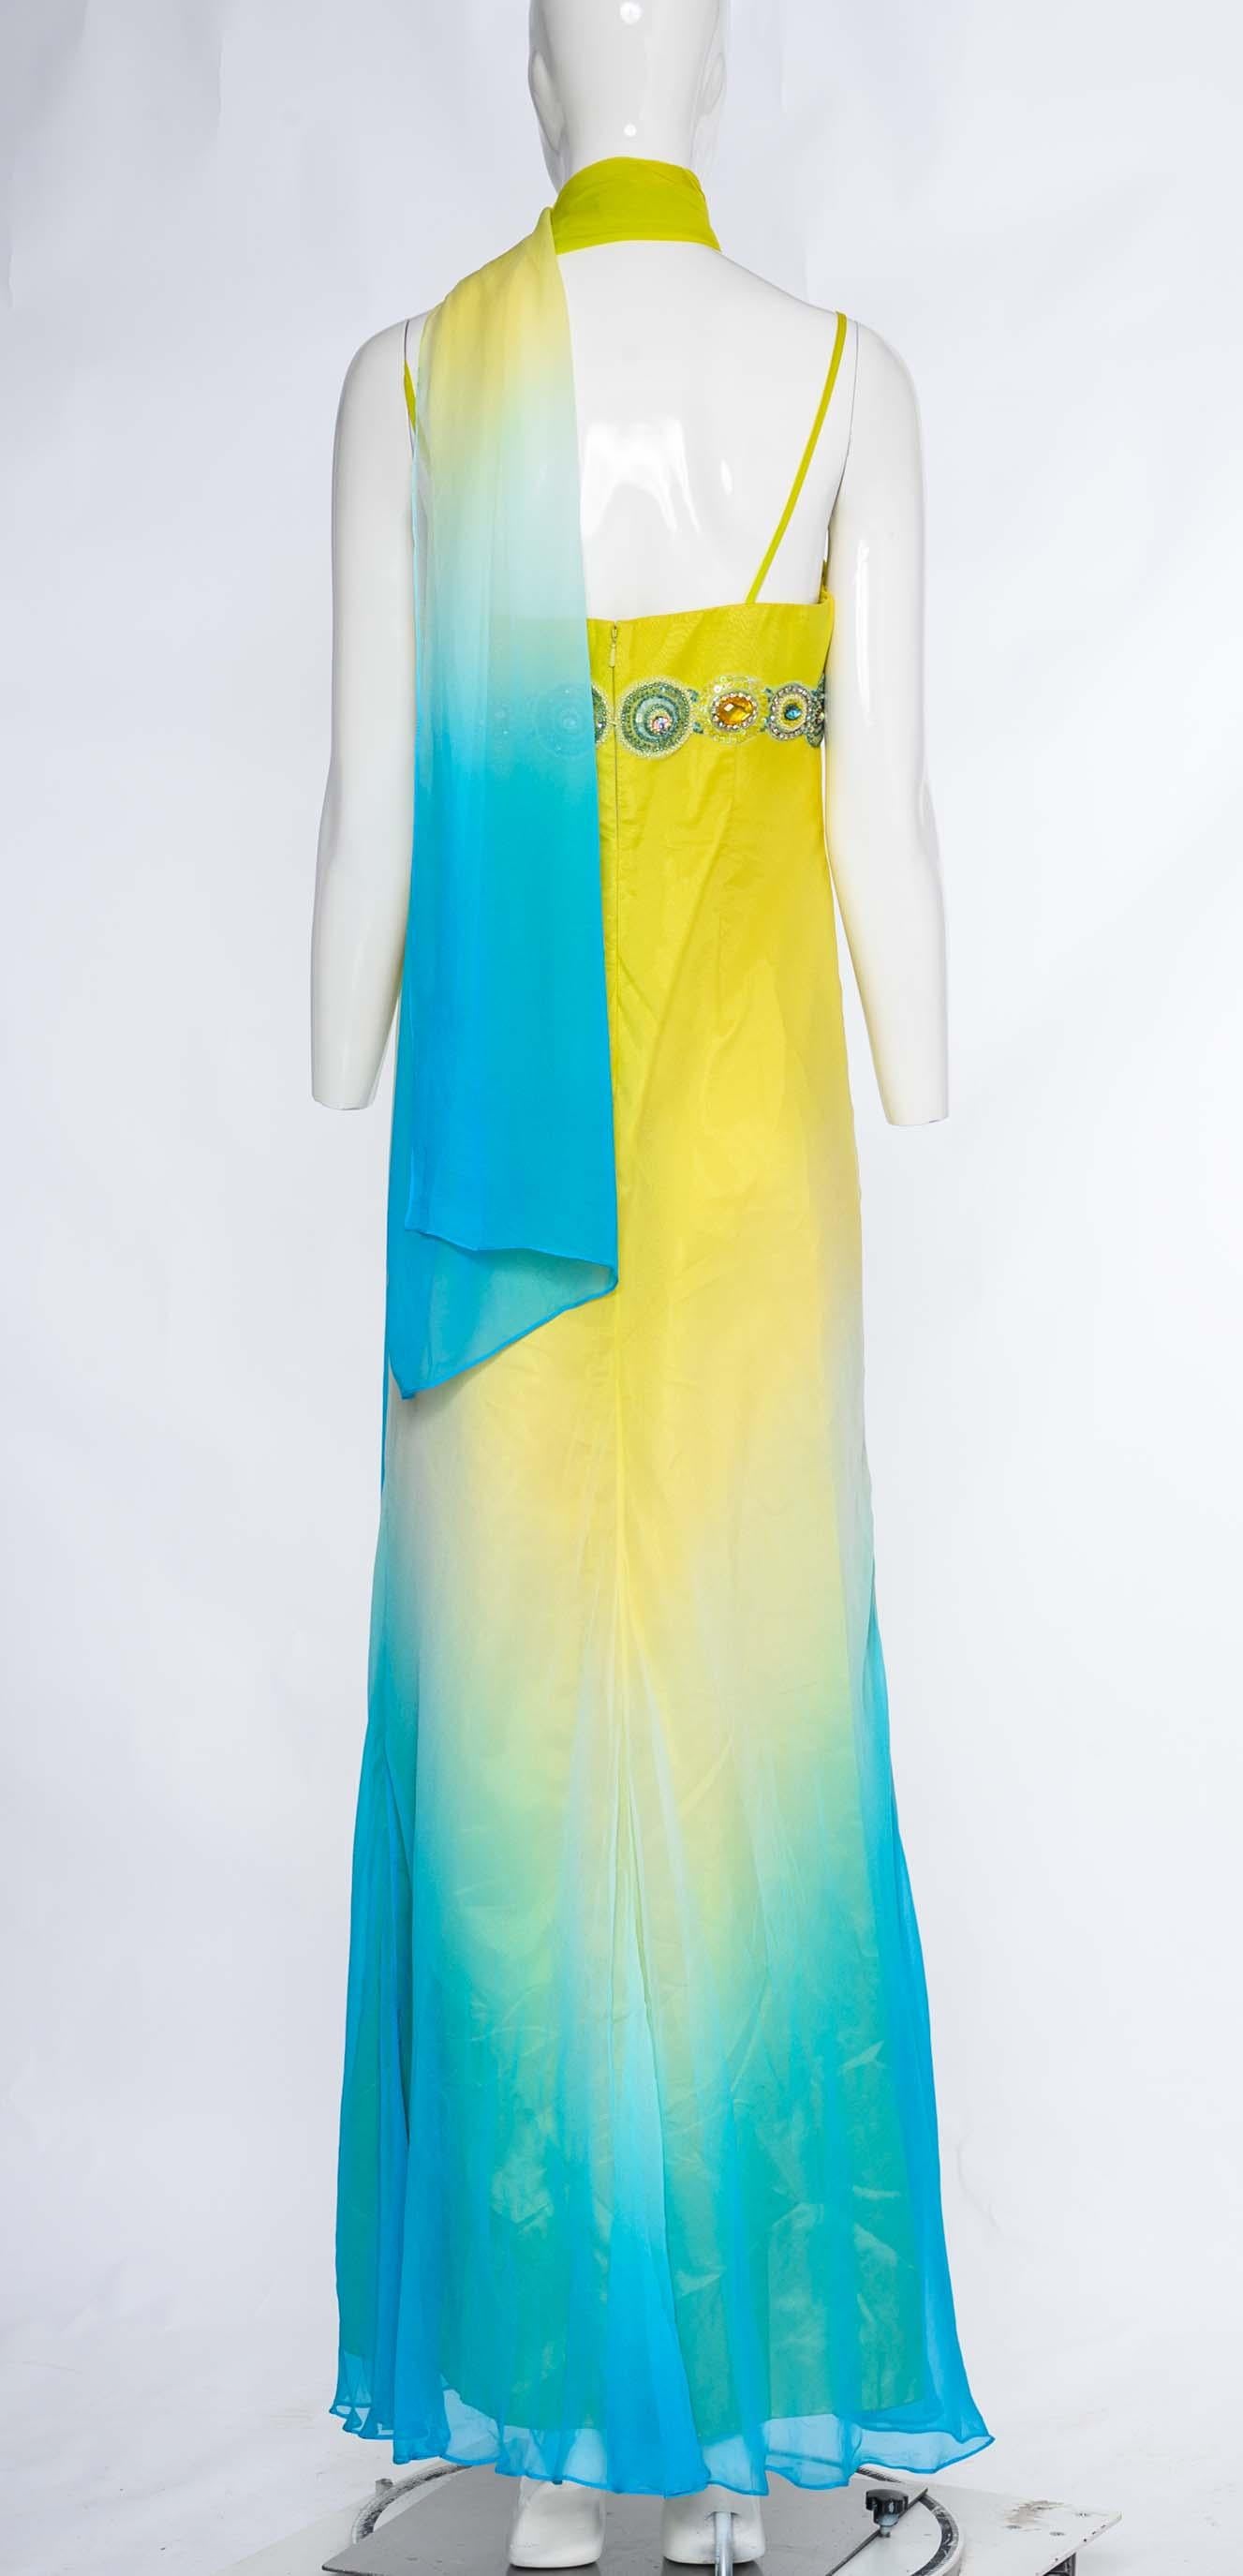 Step back in time with this stunning vintage 2000s Diane Freis dress. Crafted from luxurious yellow and blue silk, this dress exudes elegance and sophistication. The ombre effect adds a touch of artistic flair, transitioning from a vibrant yellow